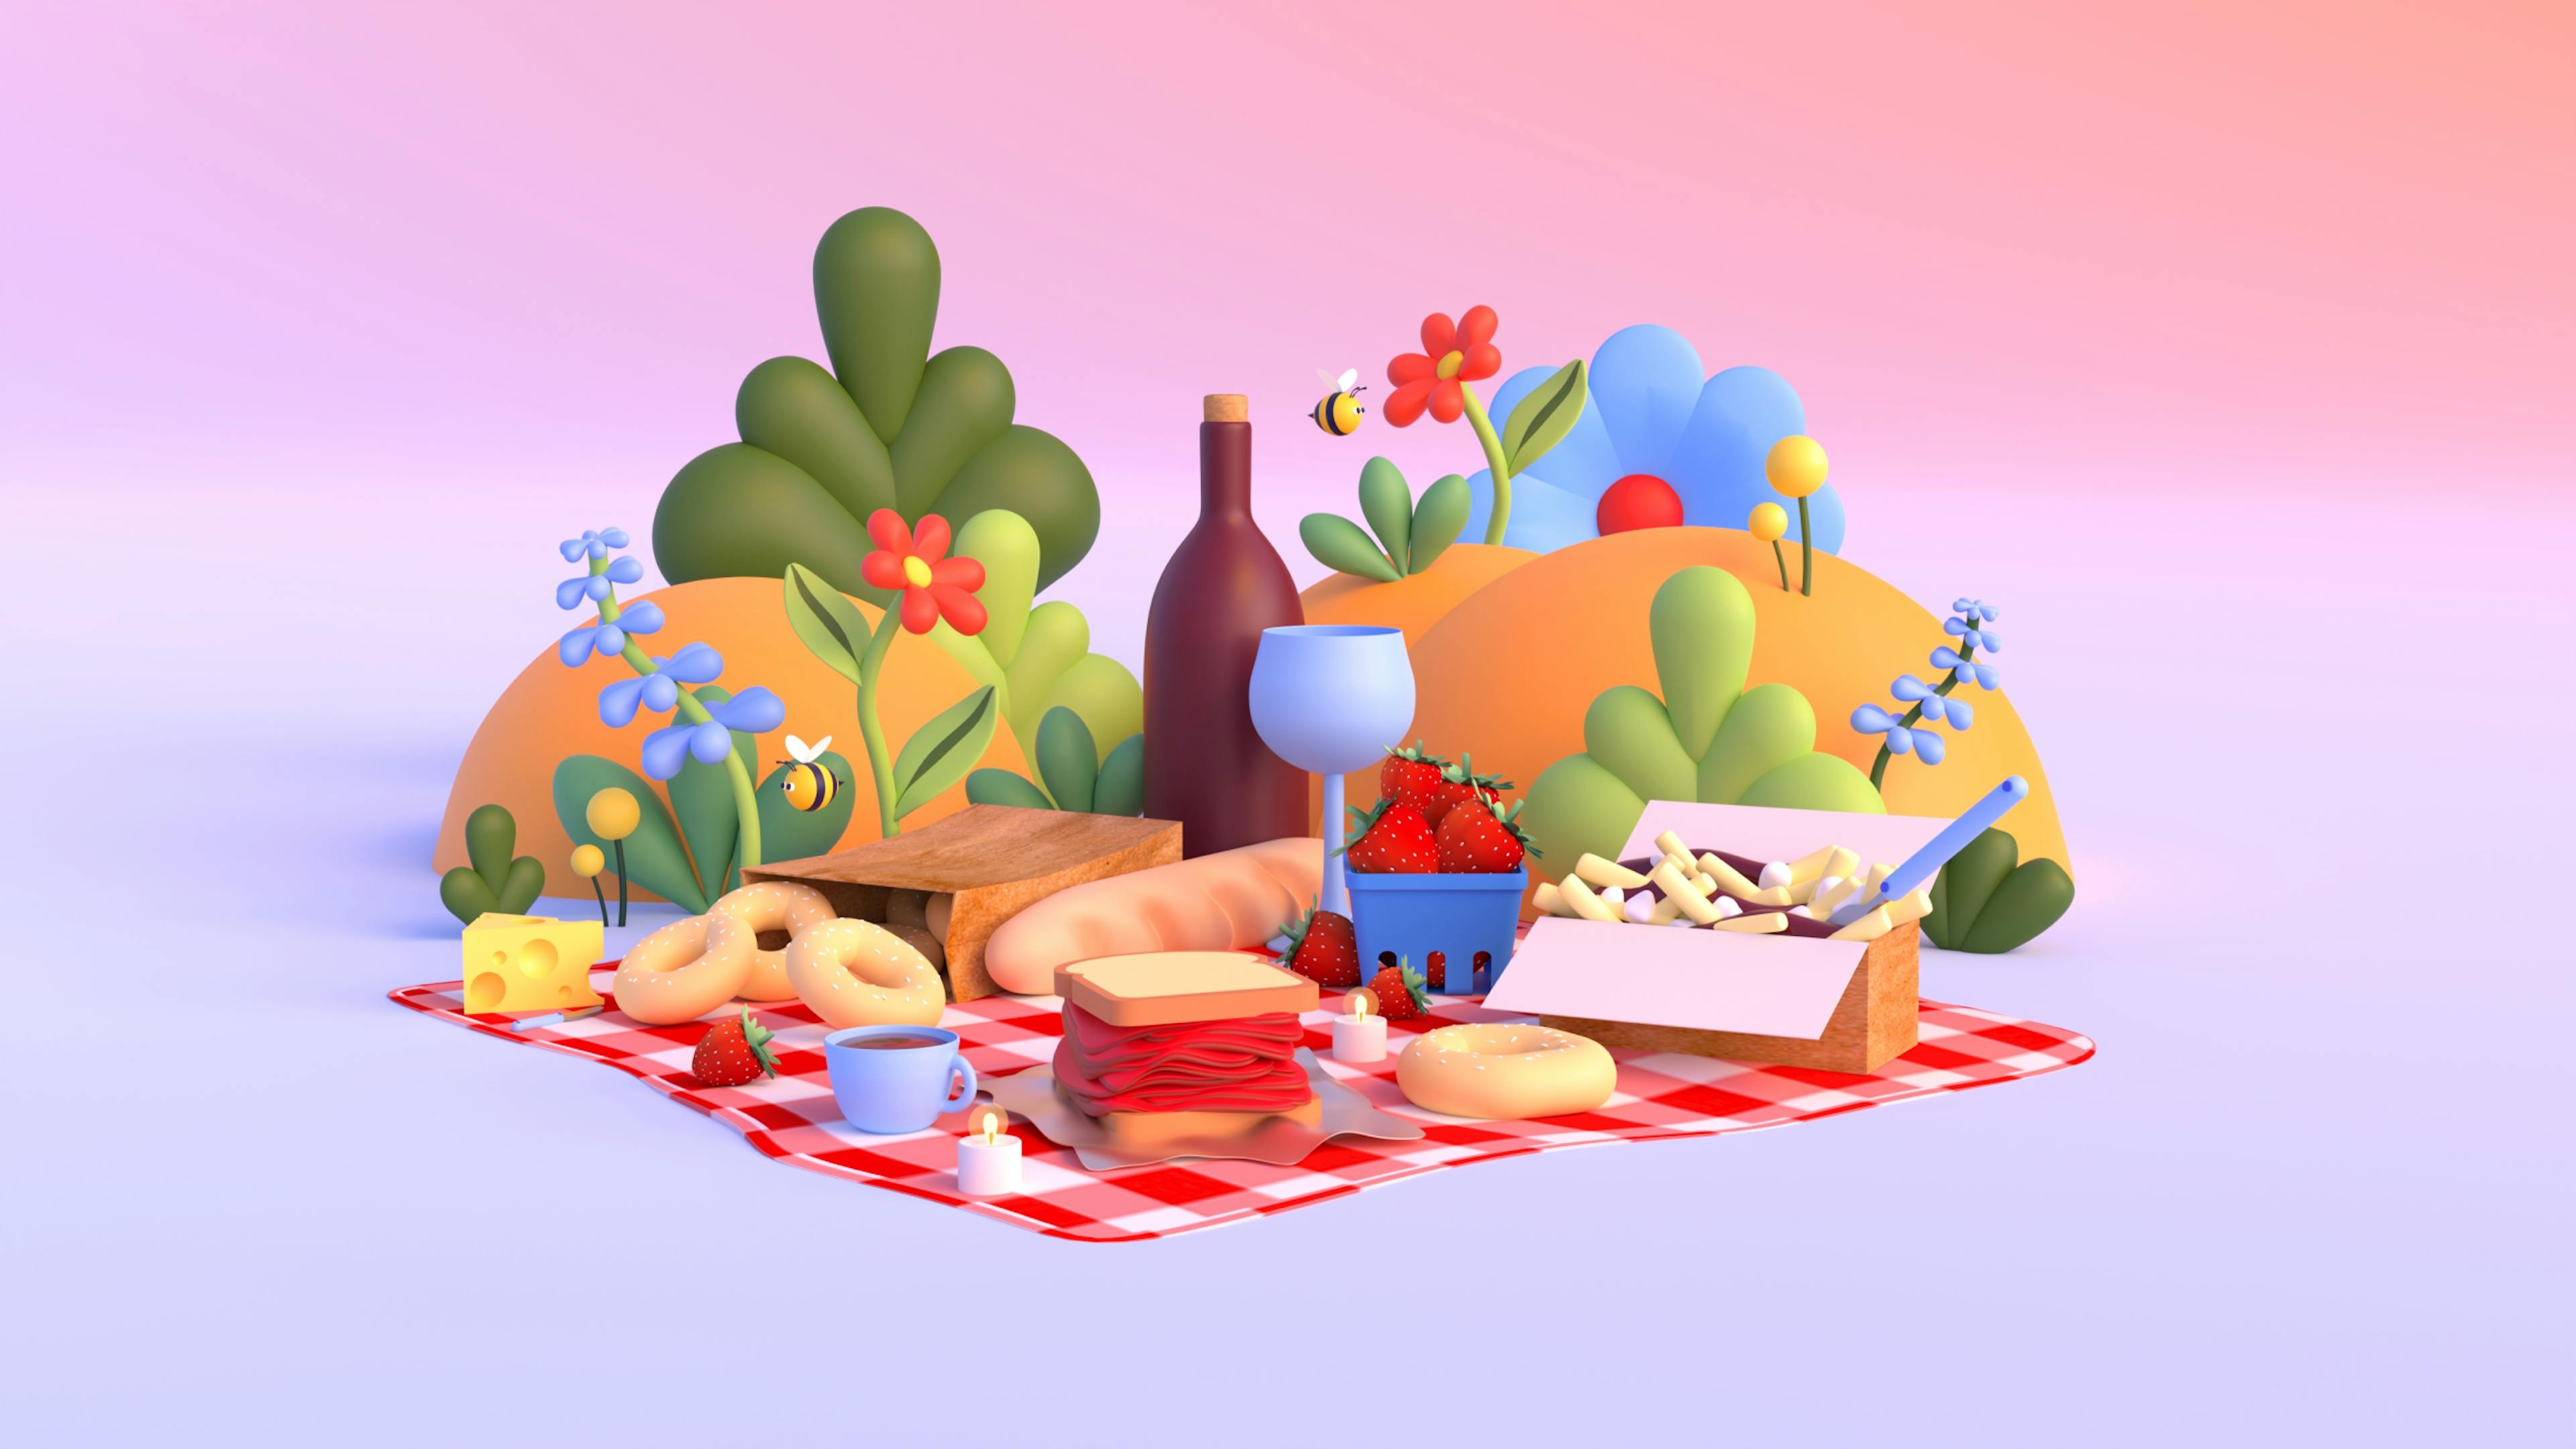 A 3D illustration of a food spread out o a picnic blanket.